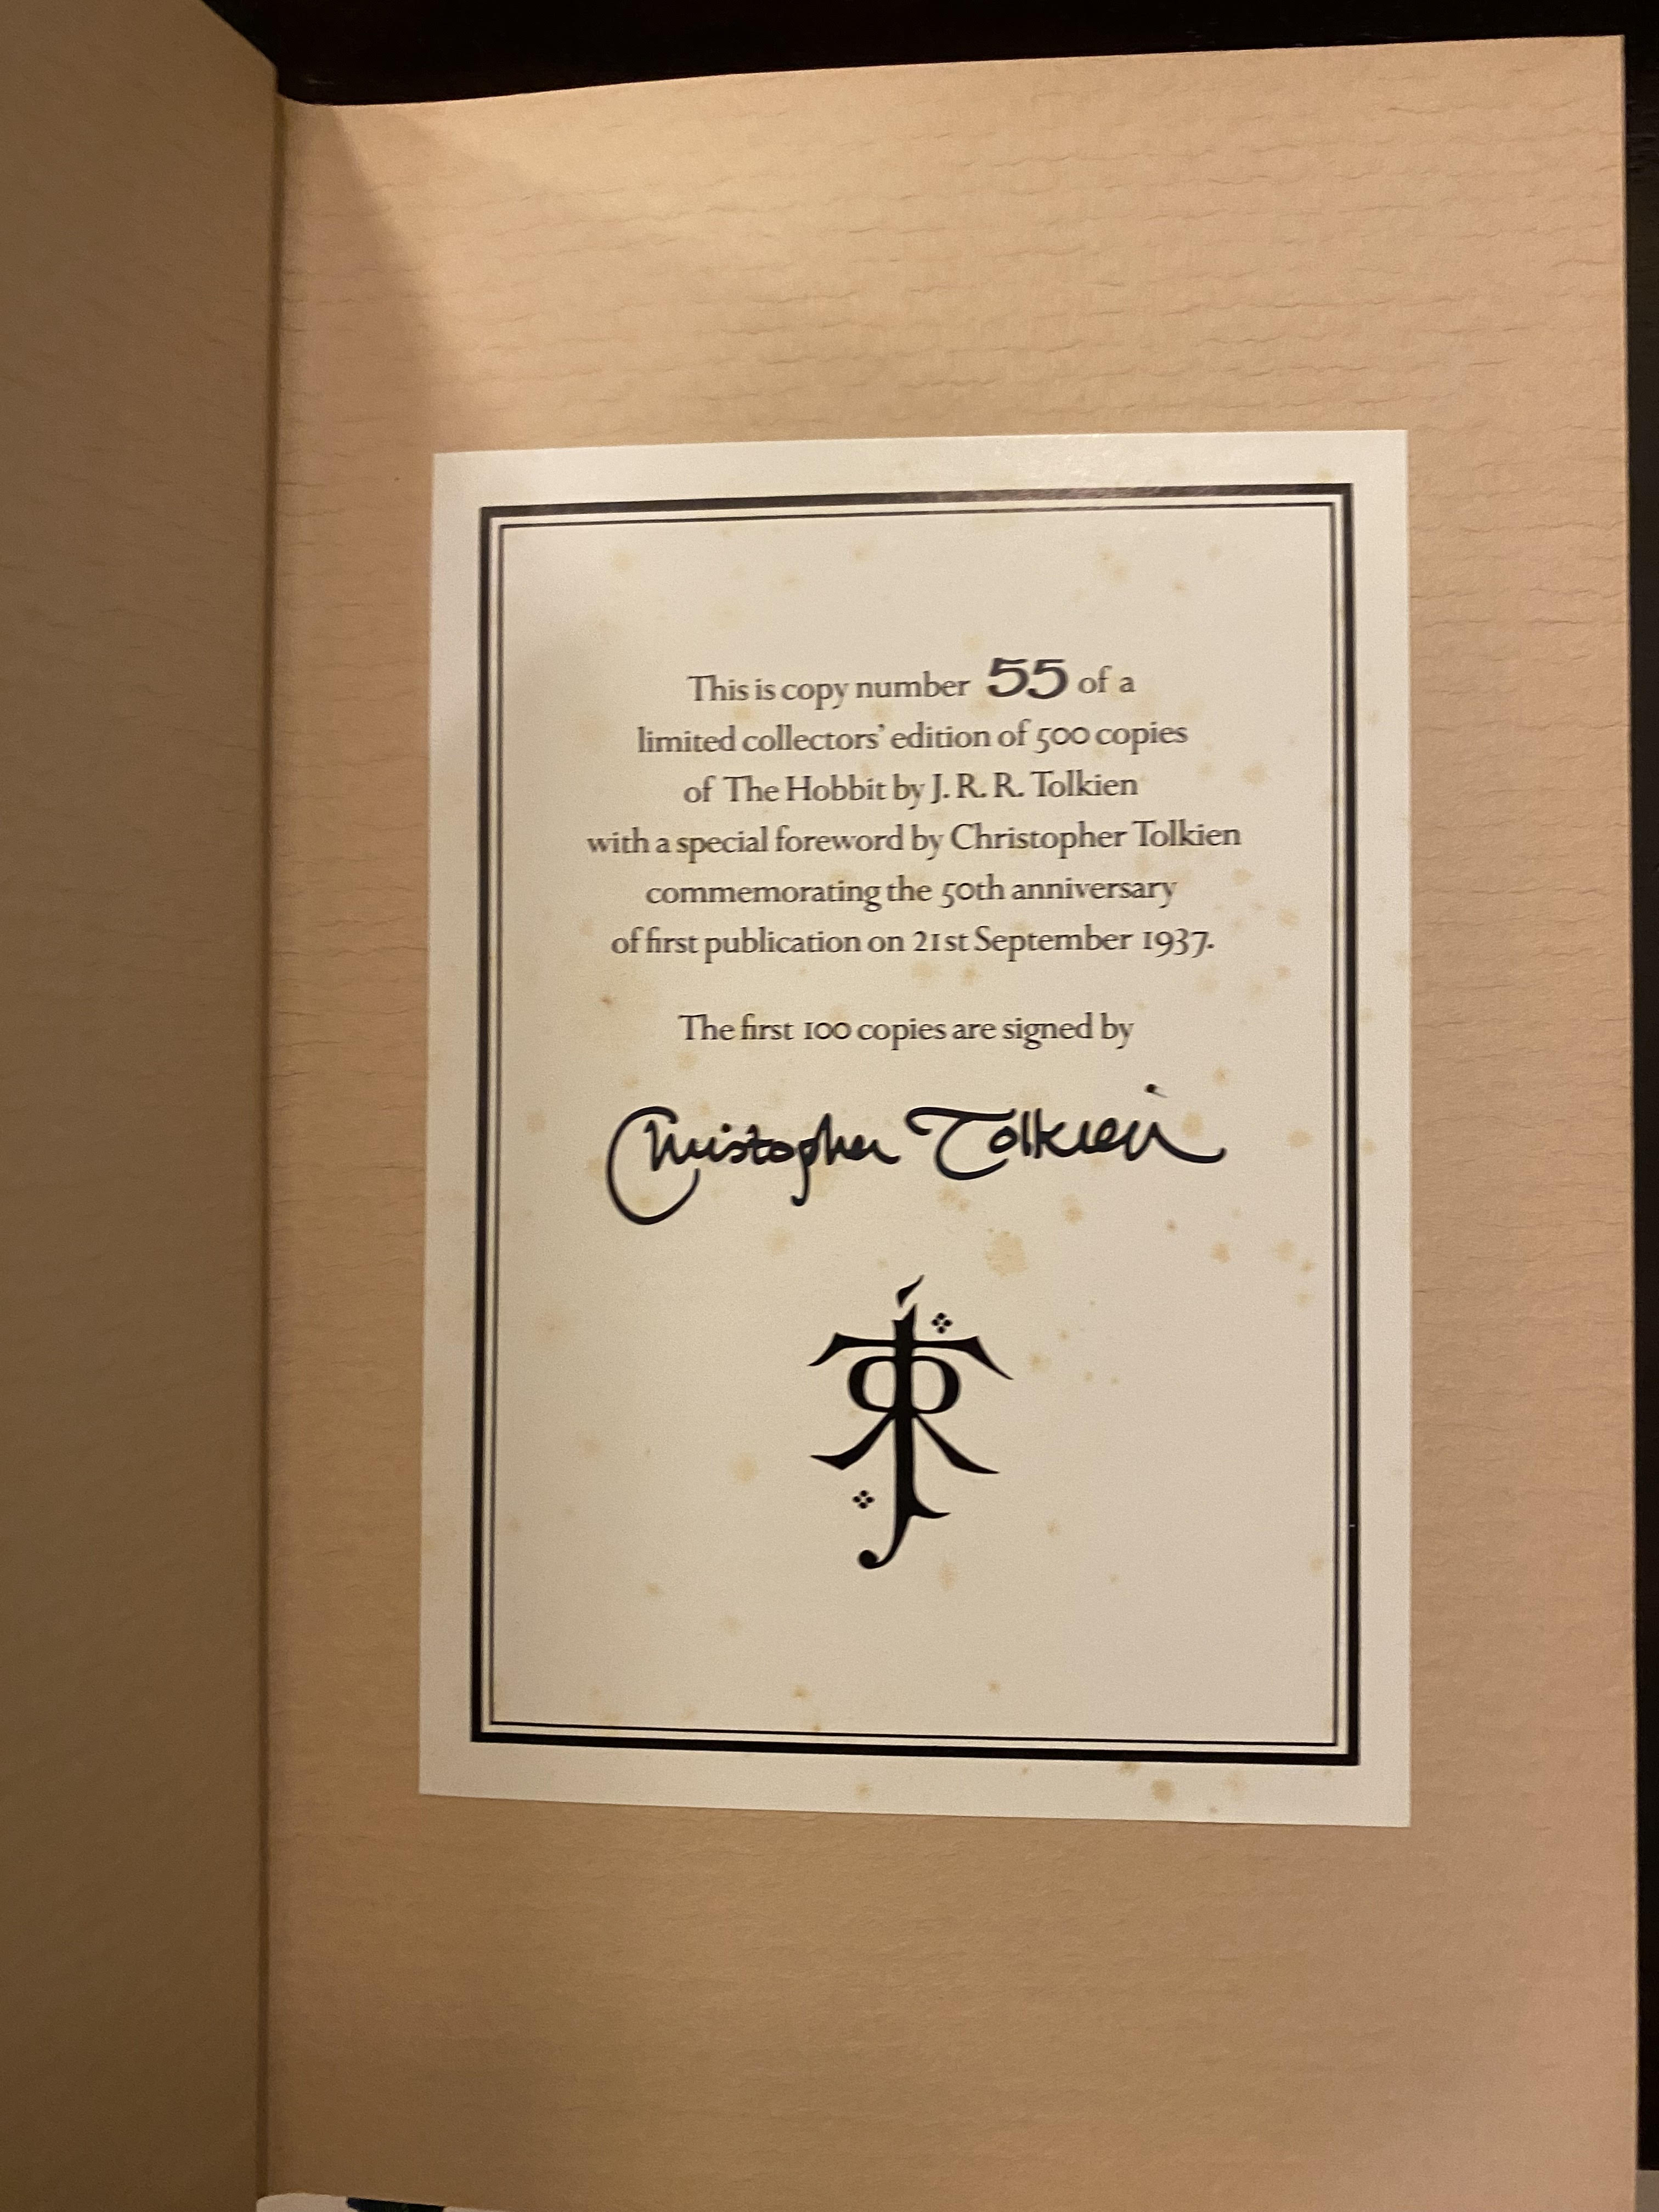 
The Hobbit, 1987 signed Super Deluxe Limited Edition #55/500